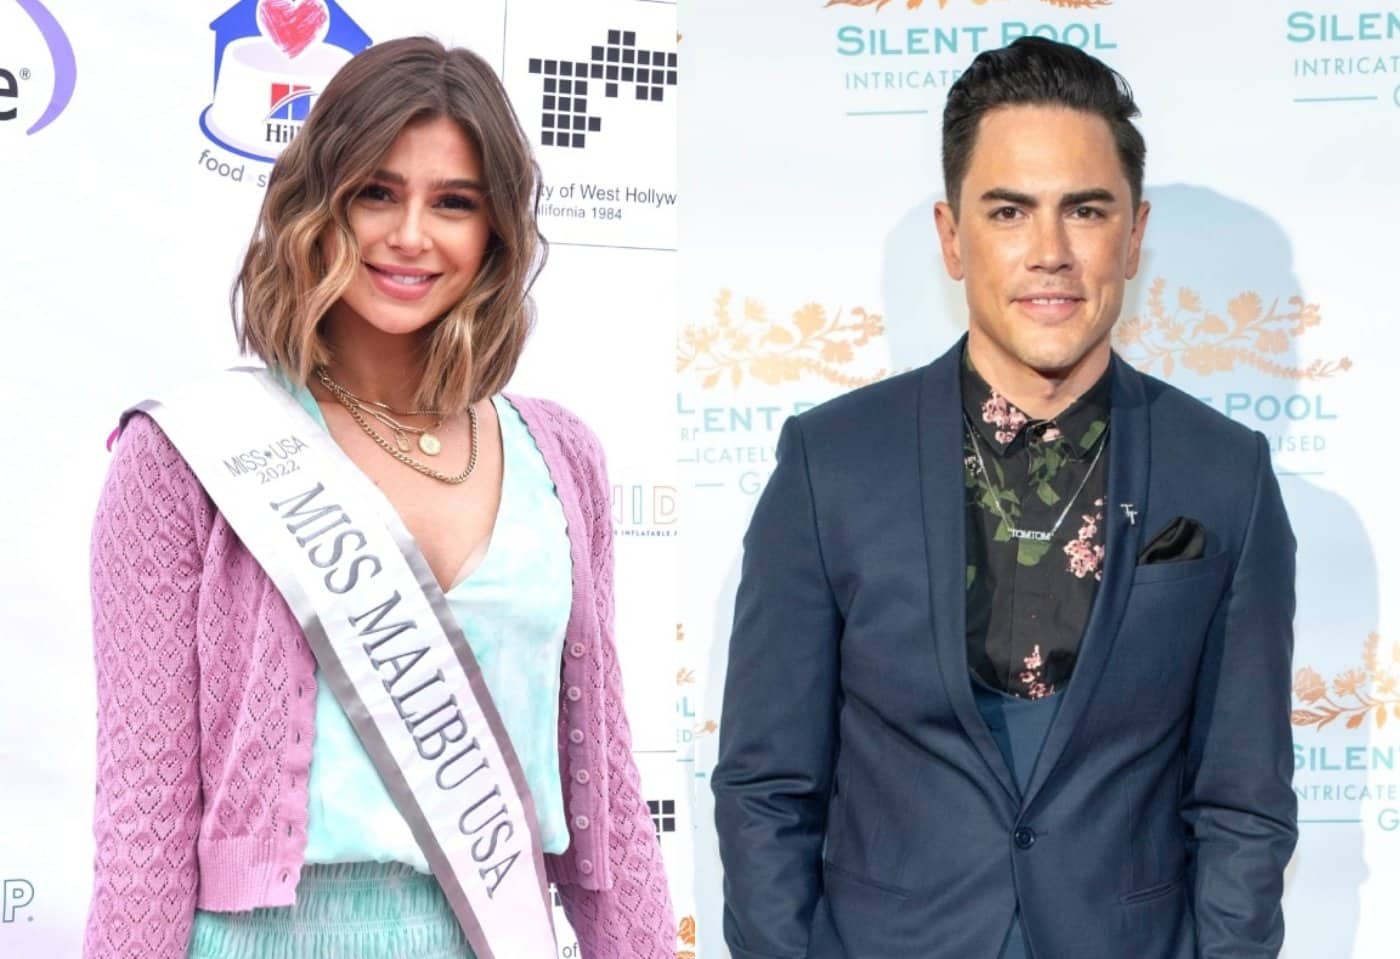 Tom Sandoval and Raquel Leviss Are "Annihilated" at Vanderpump Rules Reunion as 2 Cast Members Nearly Come to Blows at "Most Exhausting" Taping, Plus Lala Speaks Out